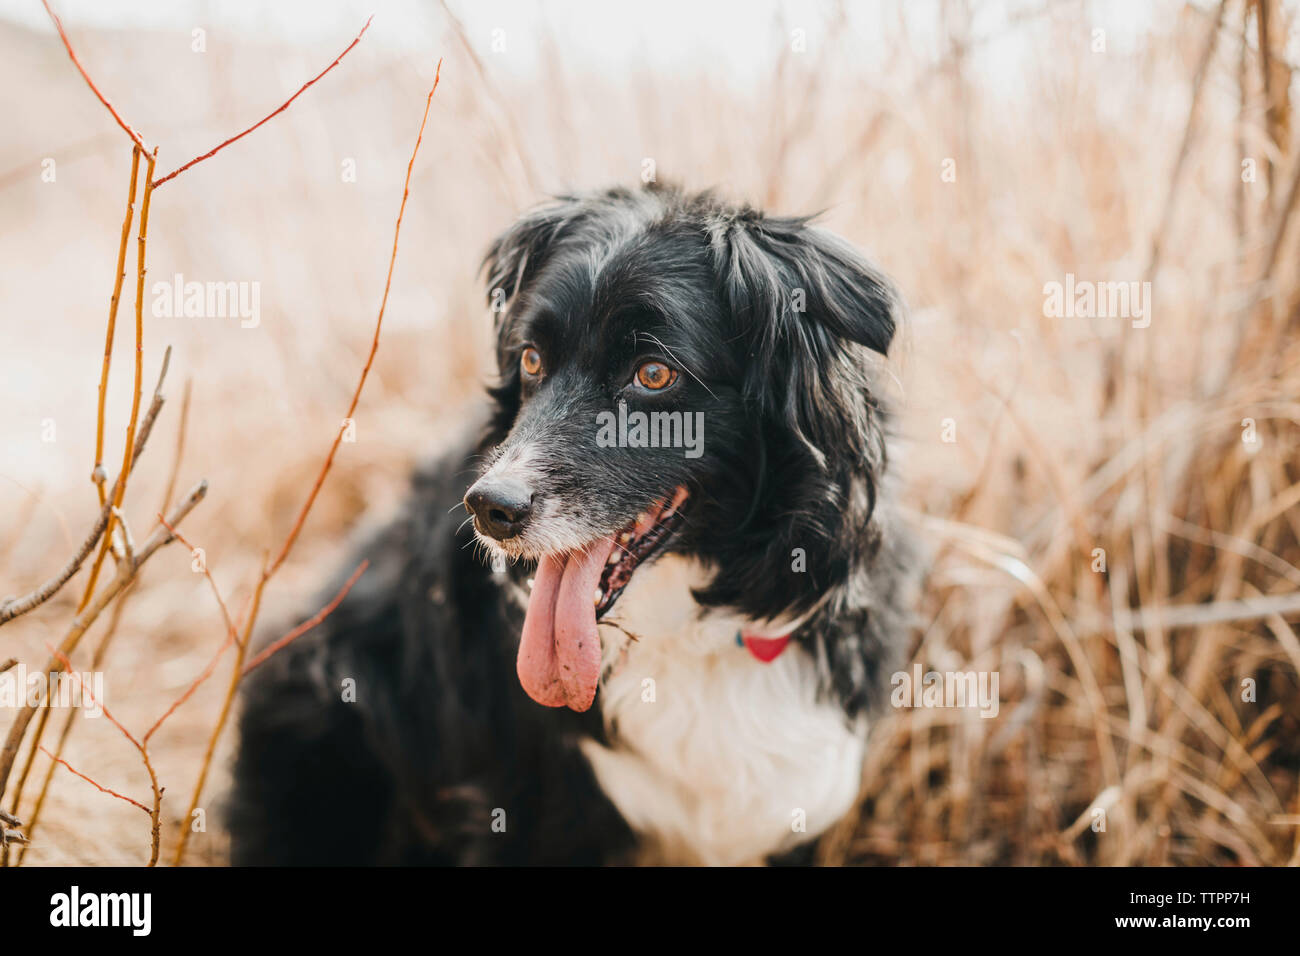 Close-up of dog sticking out tongue while standing on field Stock Photo